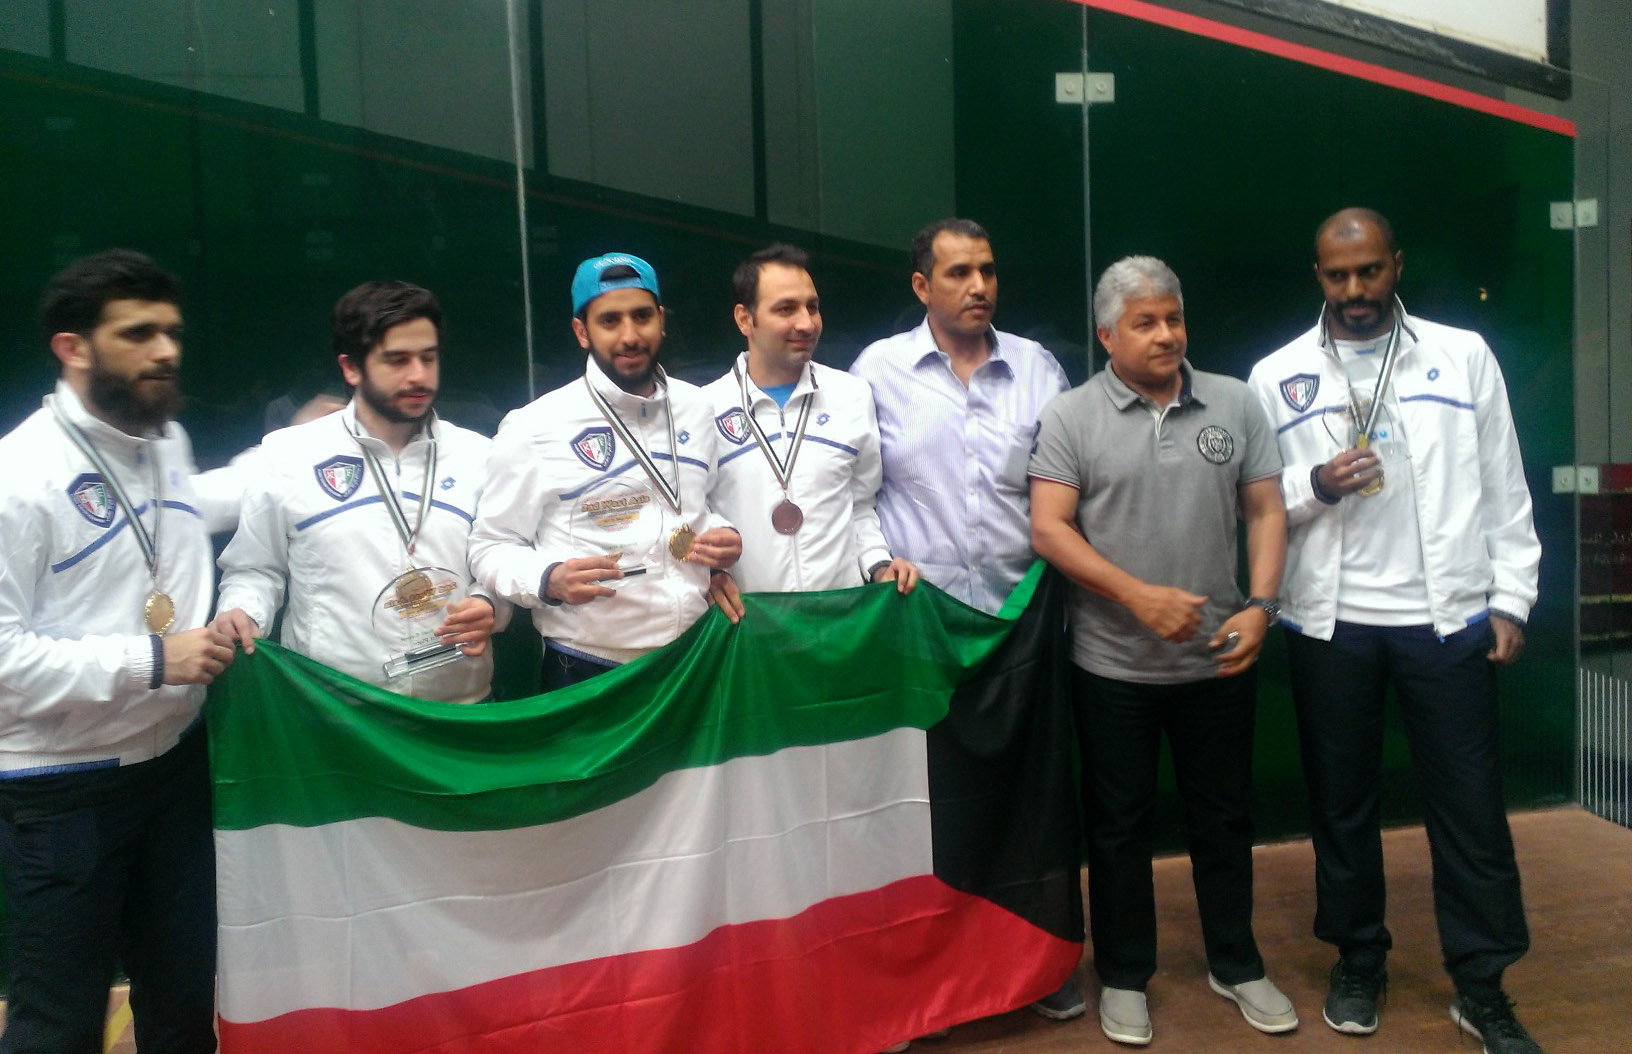 Kuwait team wins first place in group competition of West Asian Squash tourney